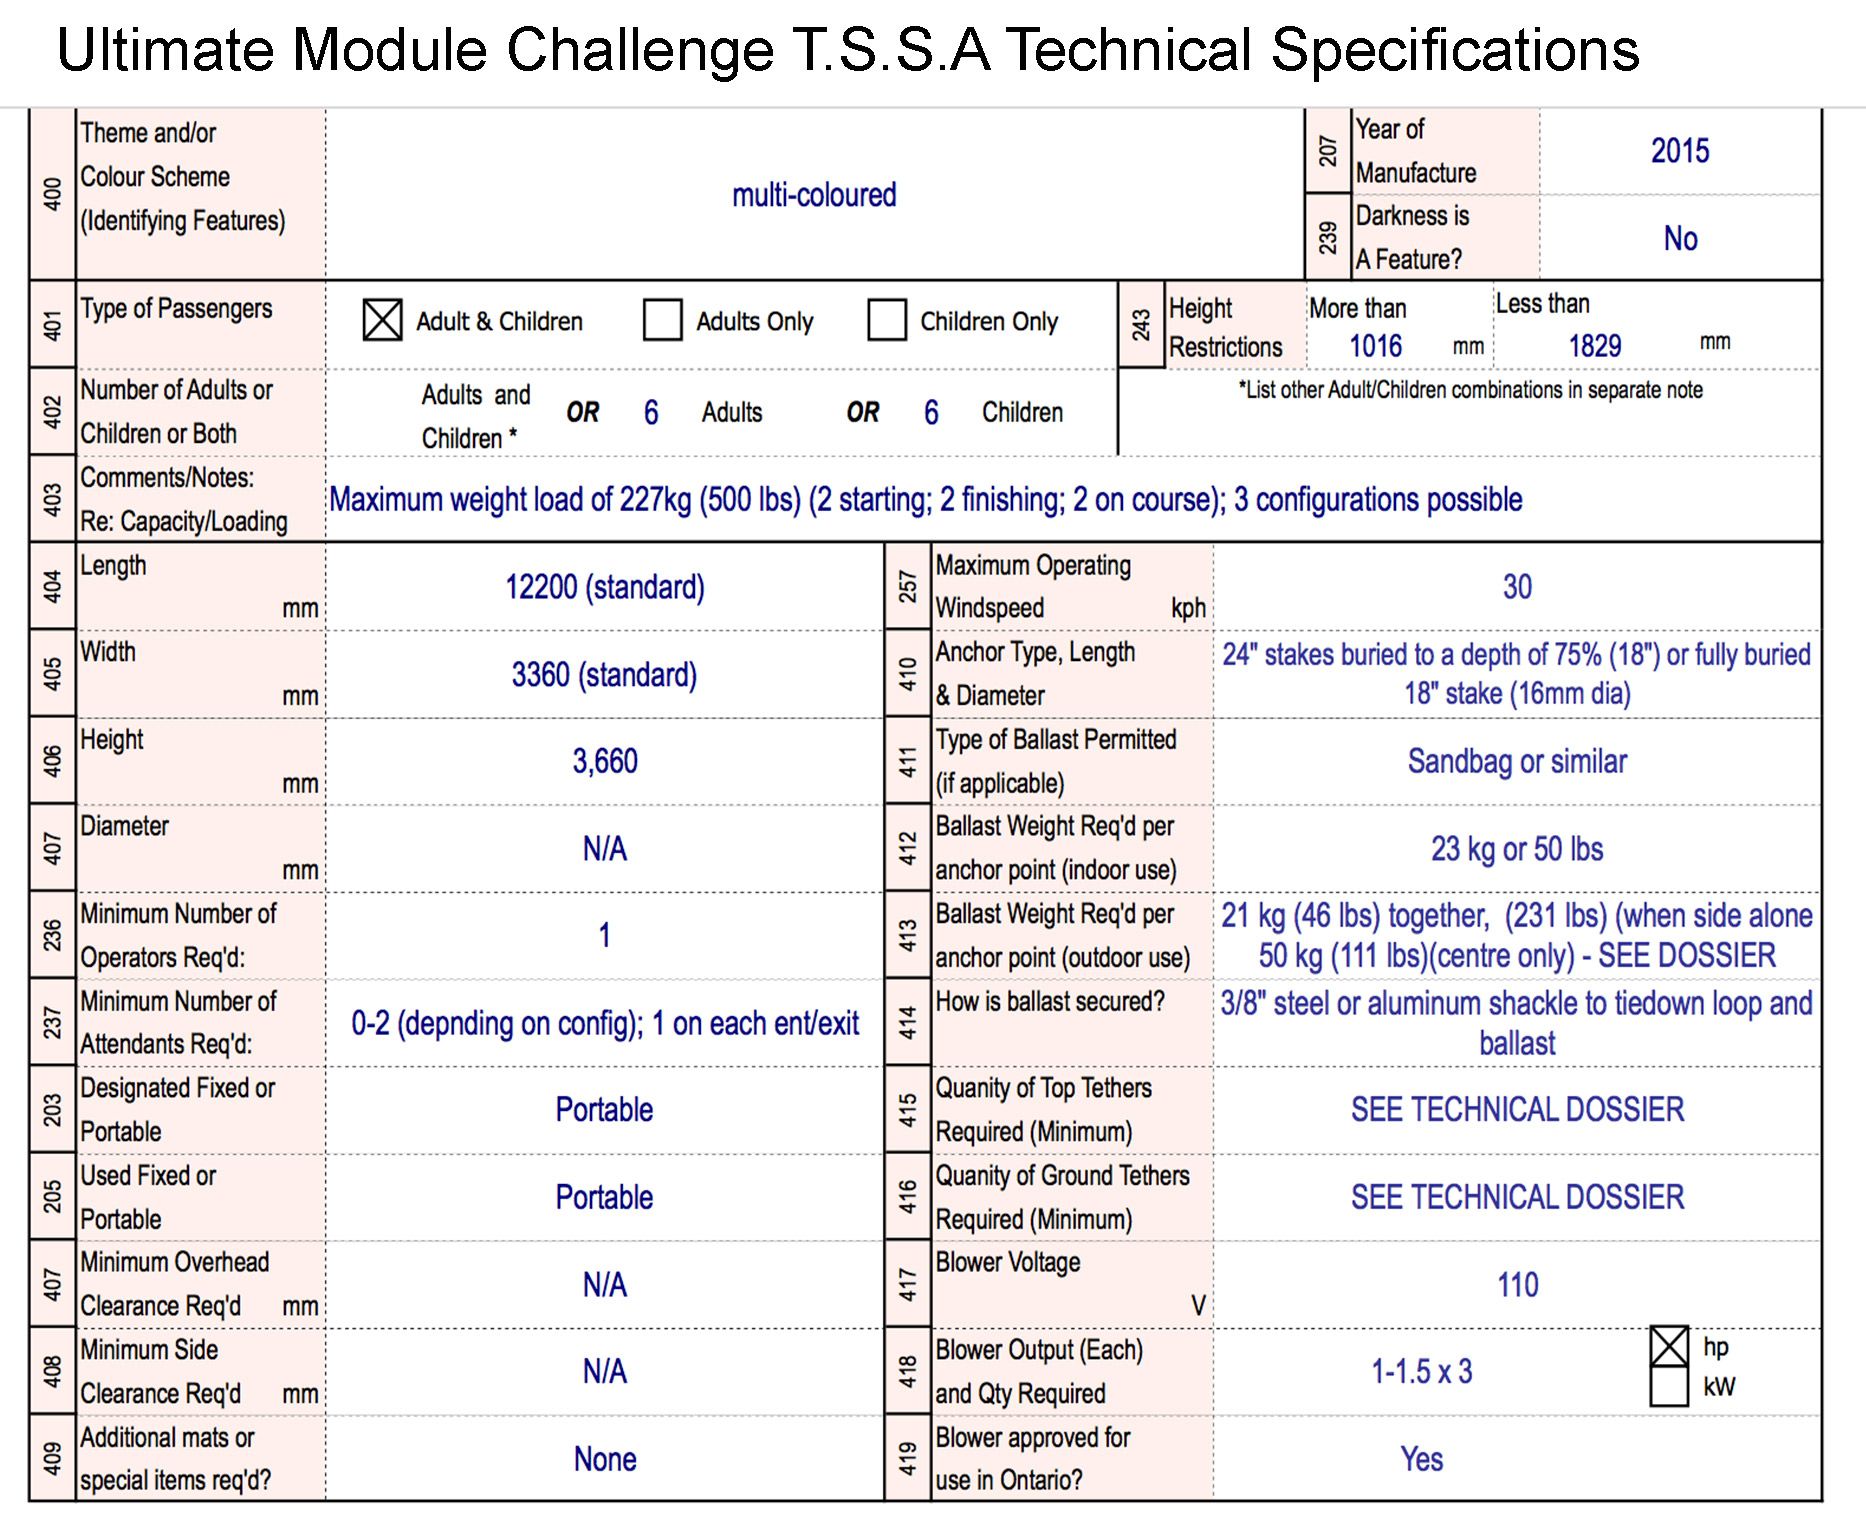 SPECS Ultimate Module Challenge compressed